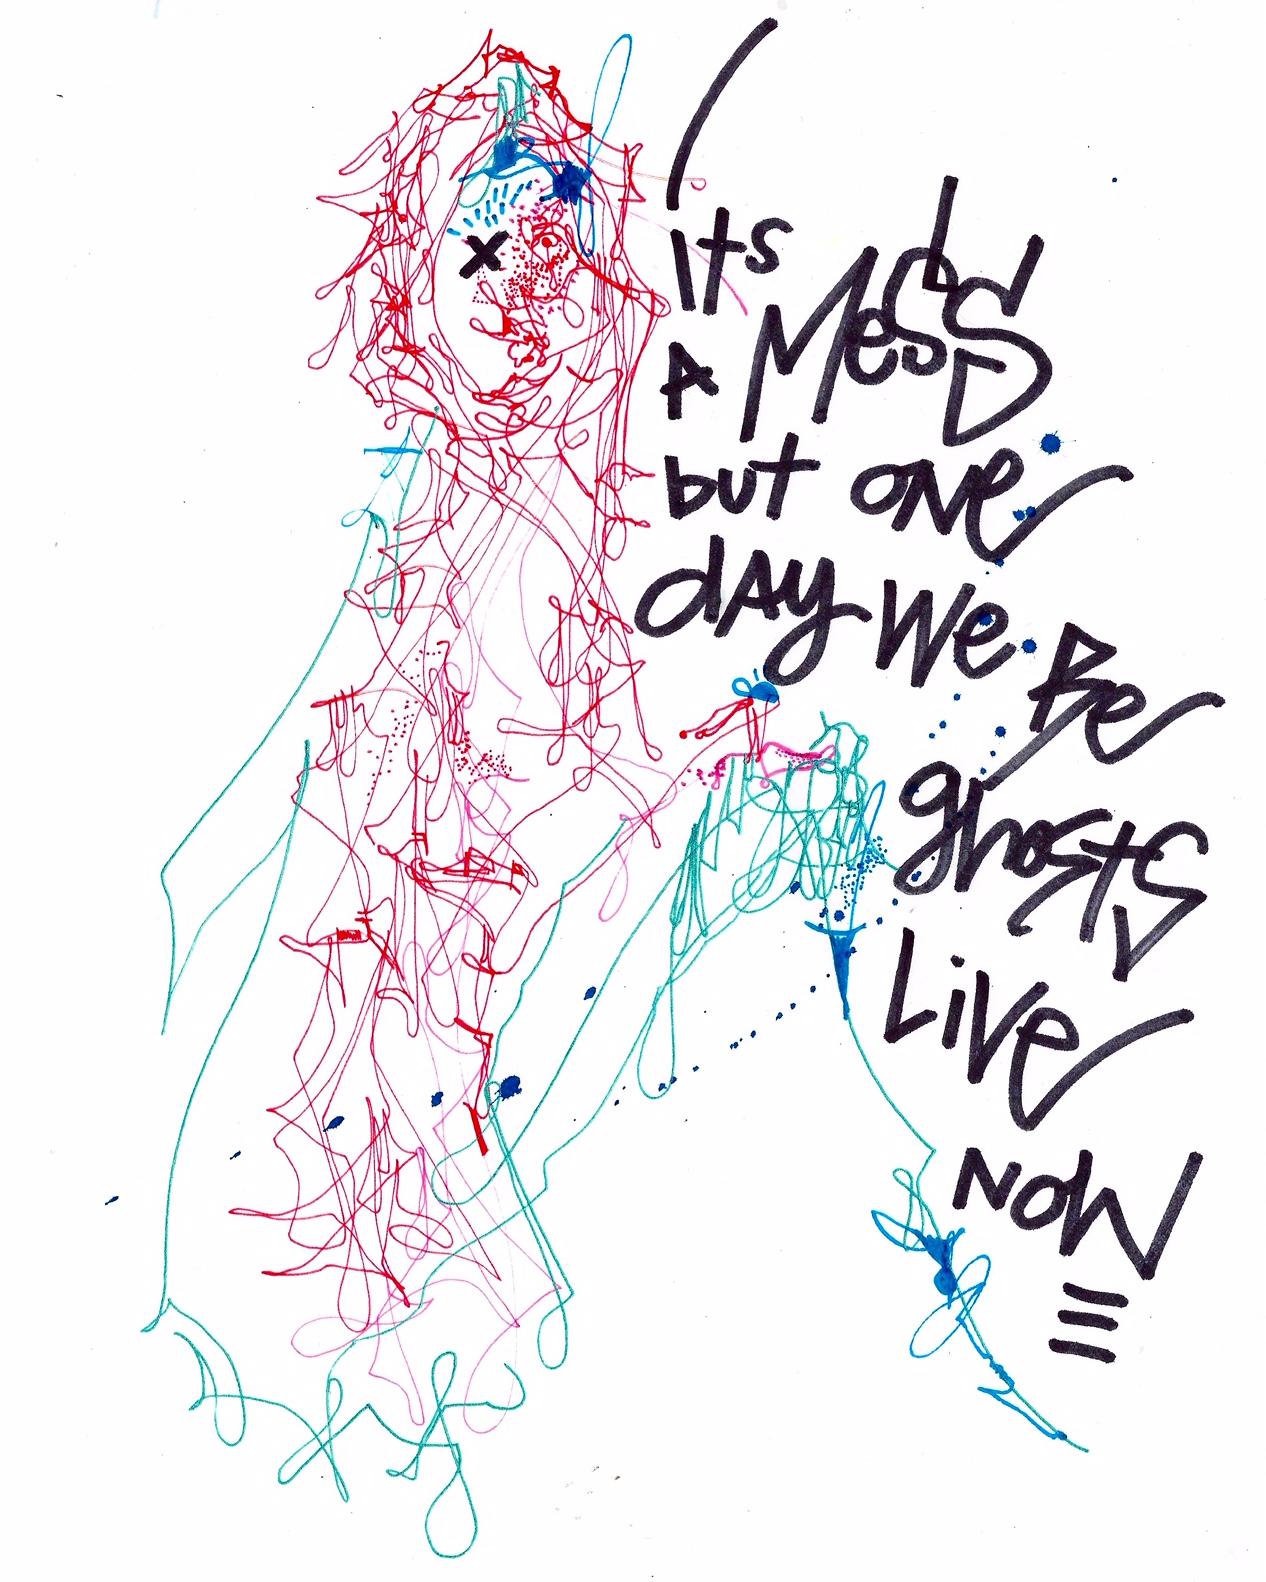 Michael Alan Abstract Drawing – Amerikanische Contemporary Art von M. Alan -It's a Mess but One Day W'll all be Ghosts